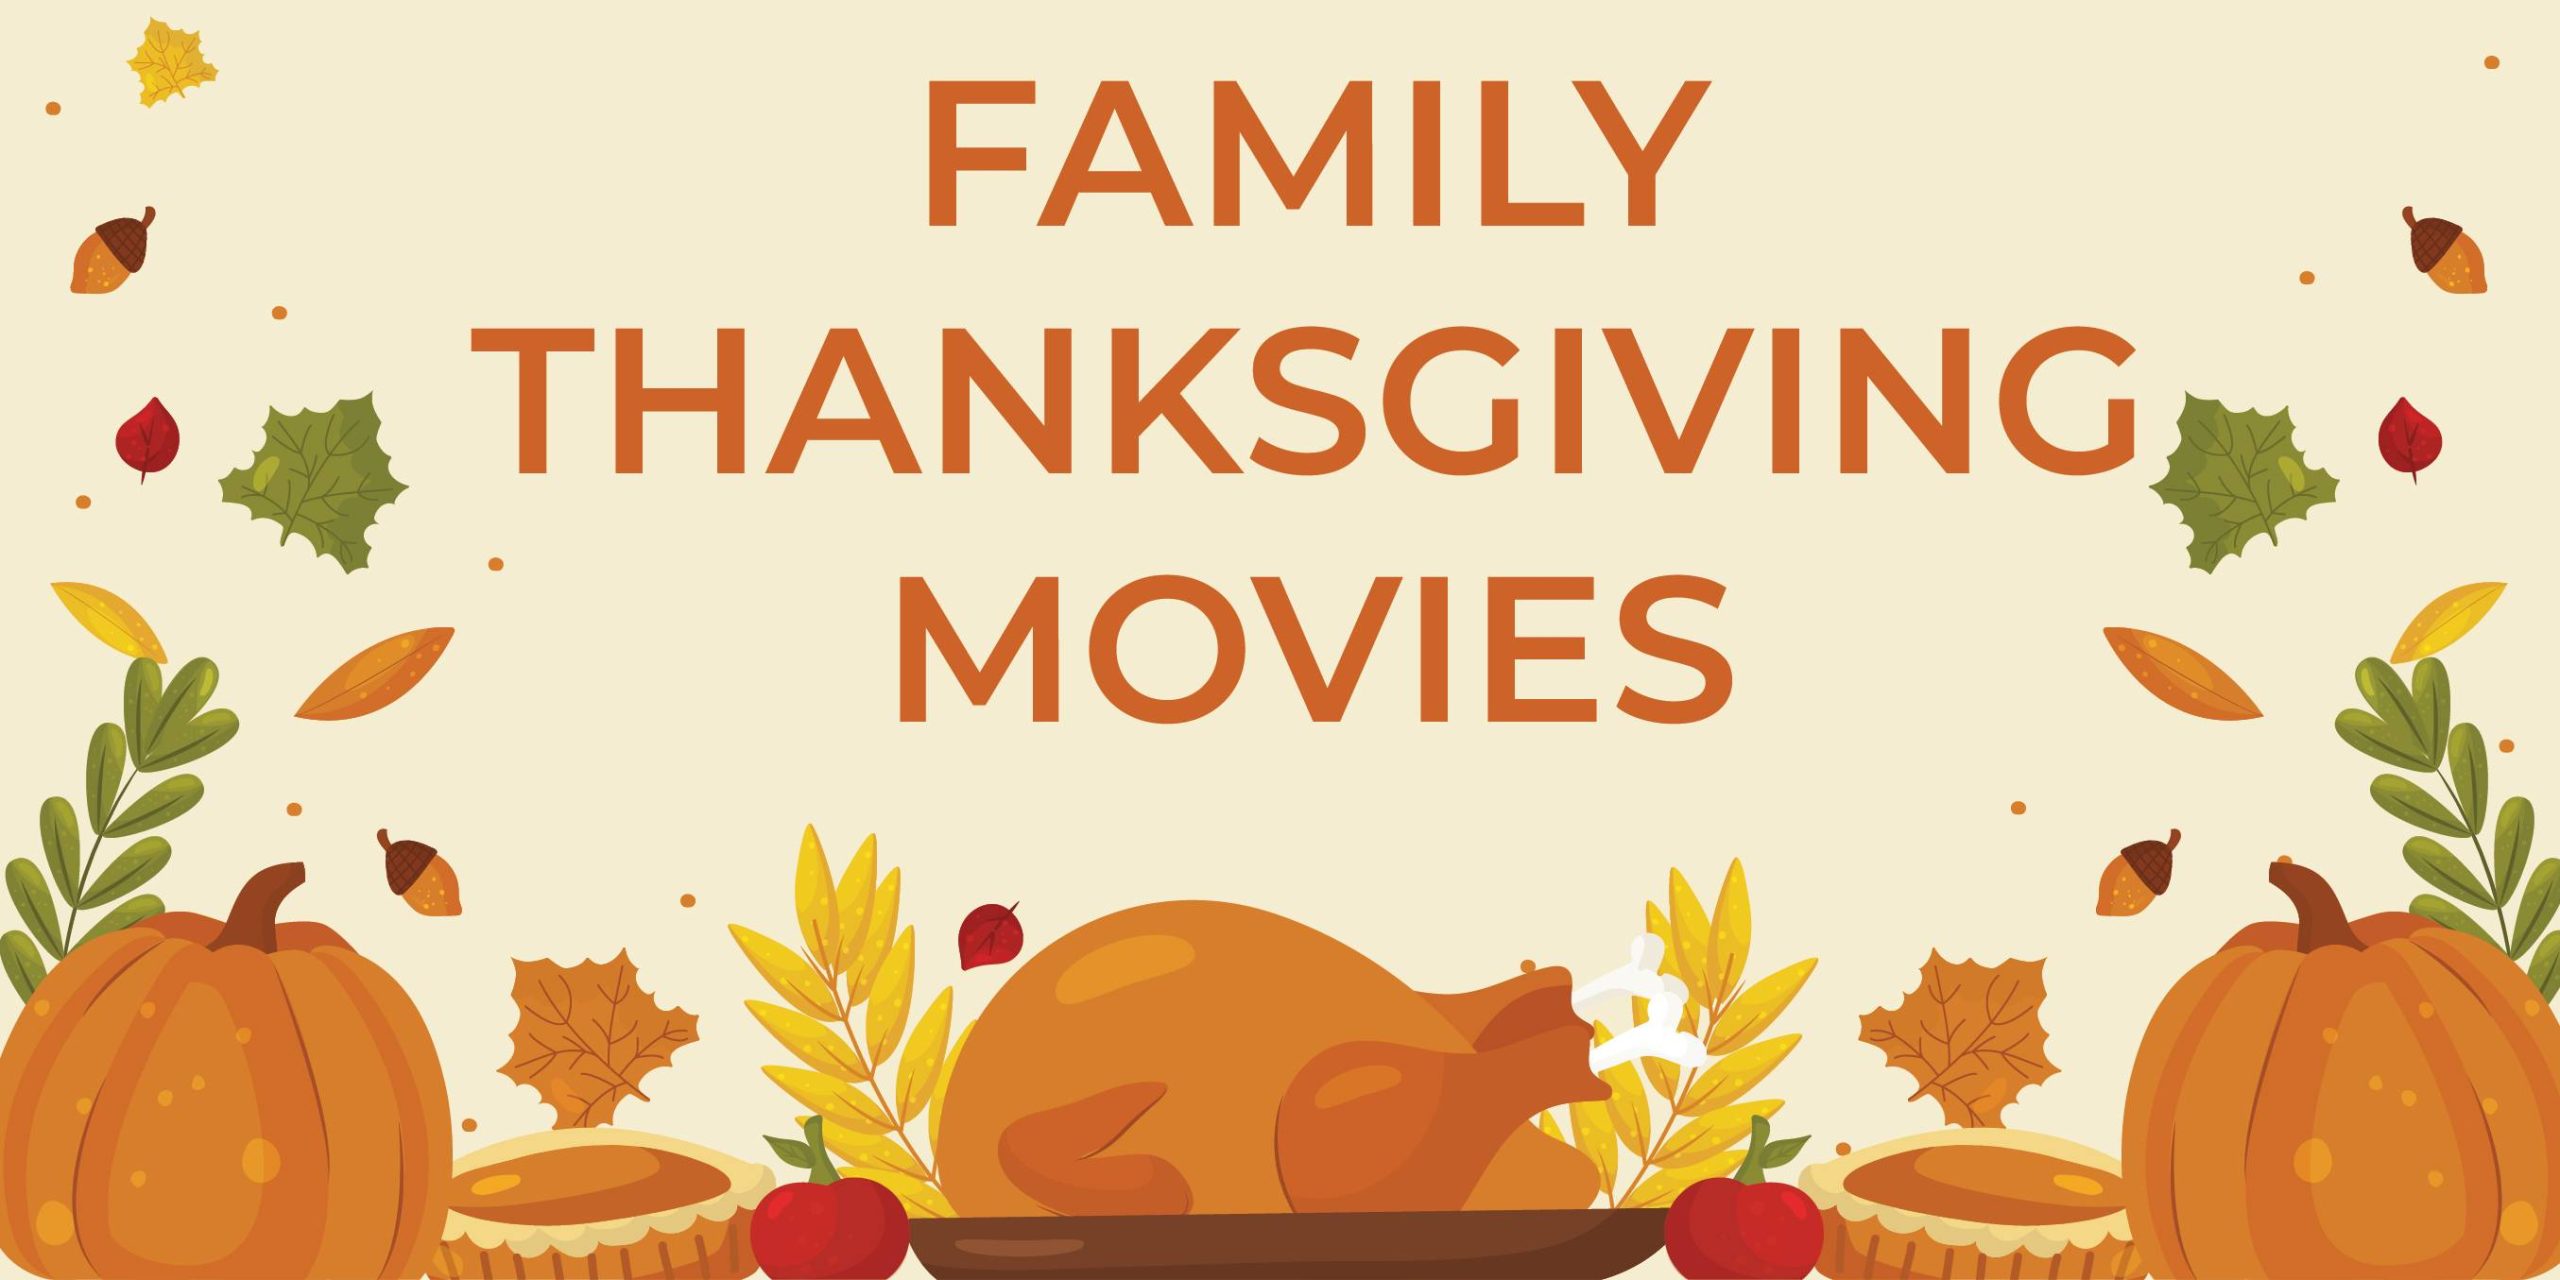 Family Thanksgiving Movies